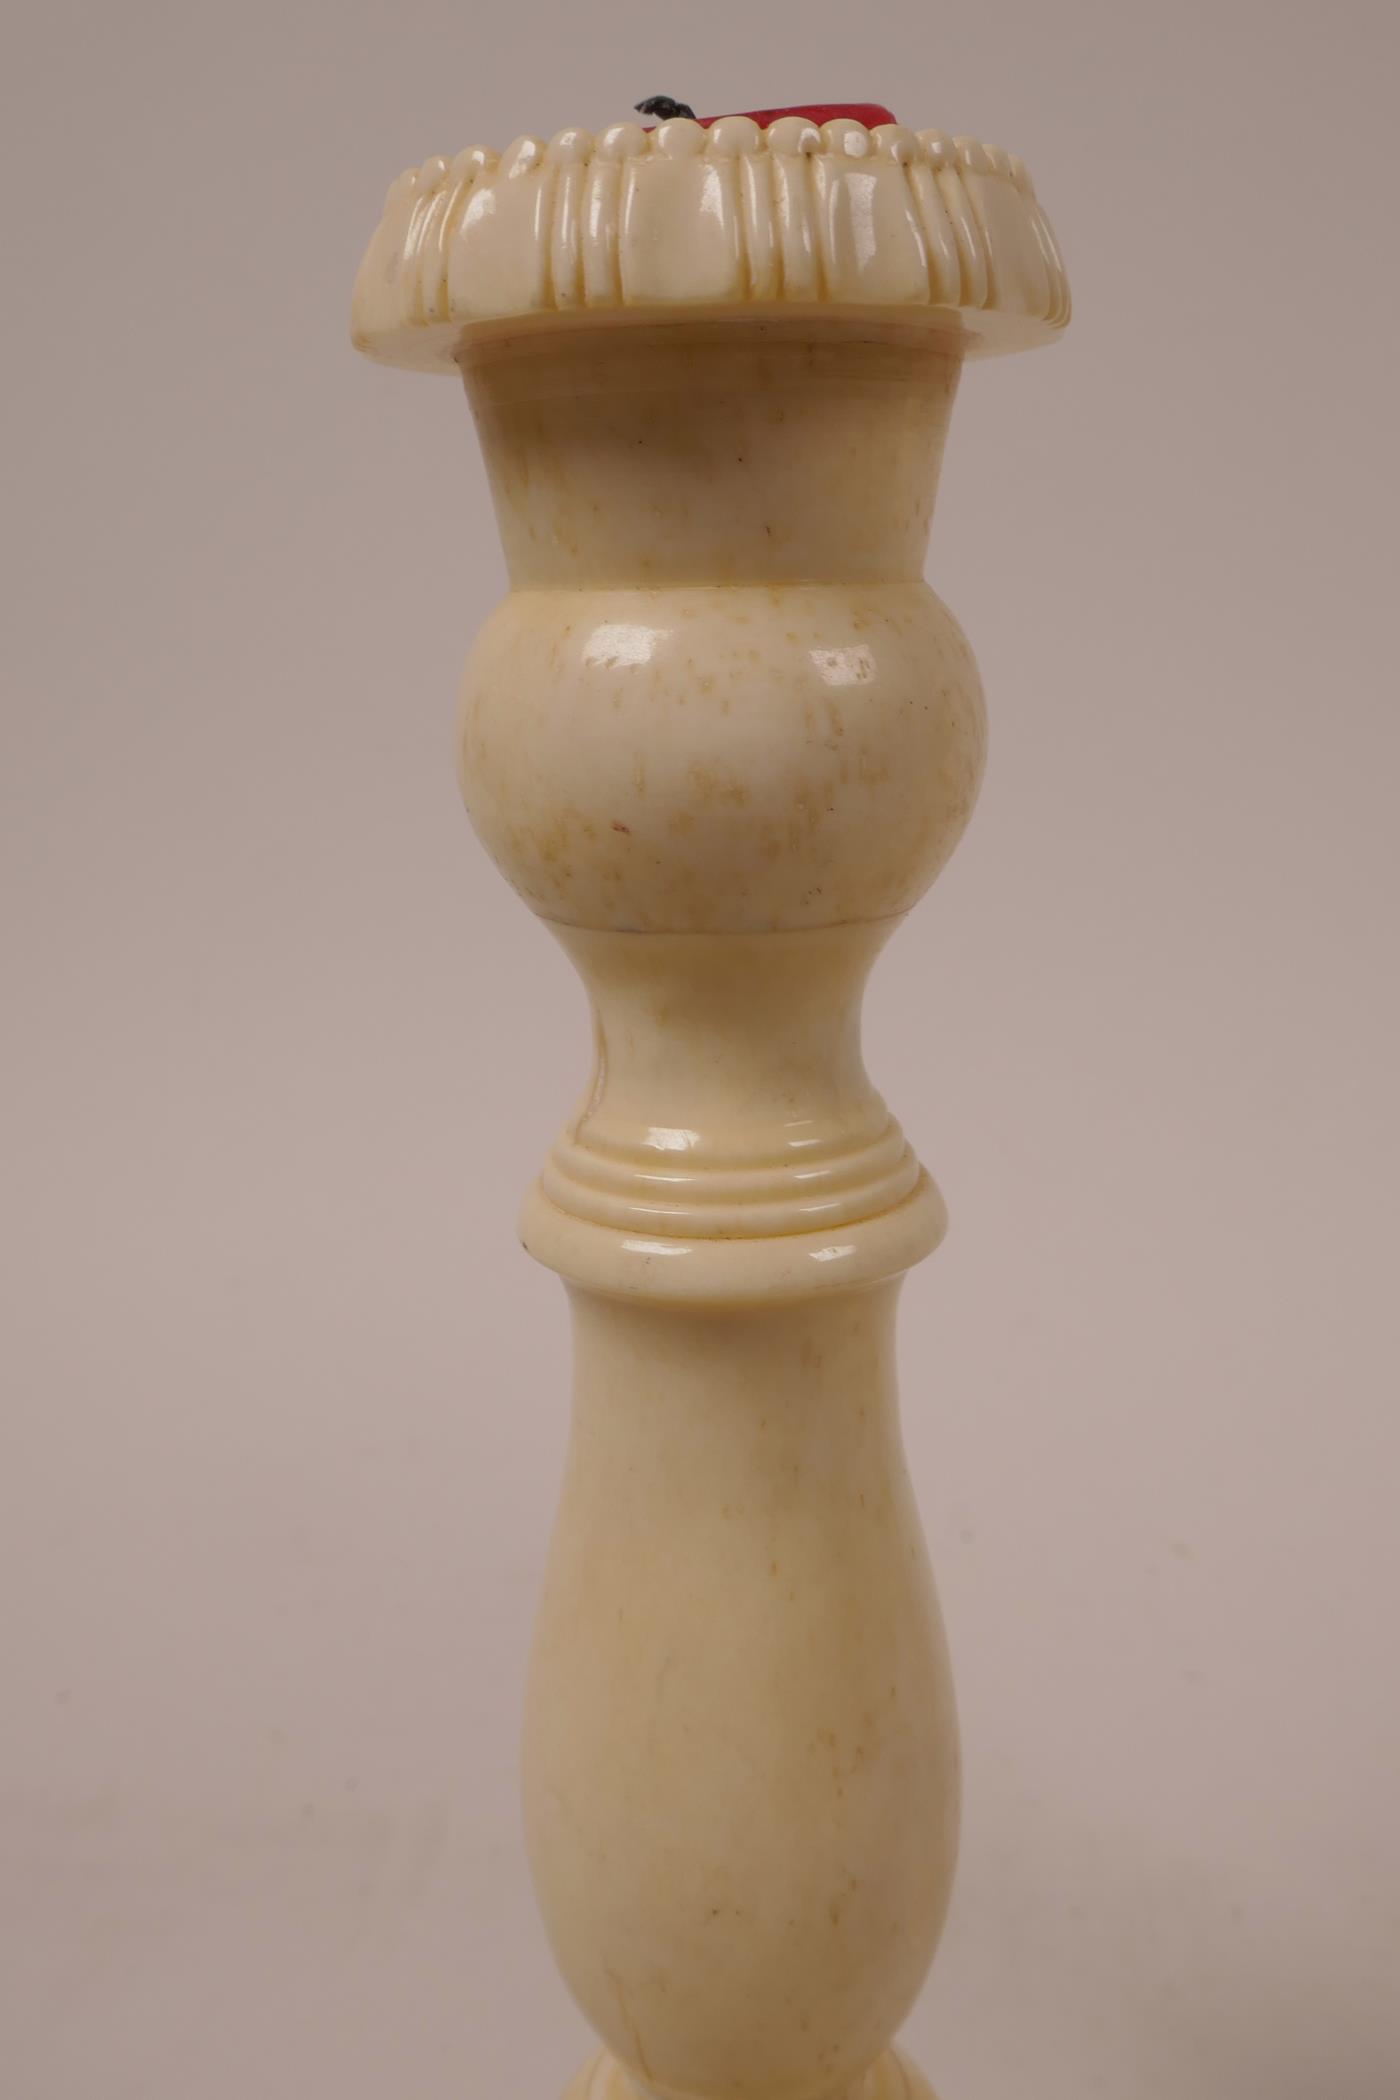 A pair of C19th bone candlesticks with turned columns, 8" high x 3" wide - Image 4 of 5